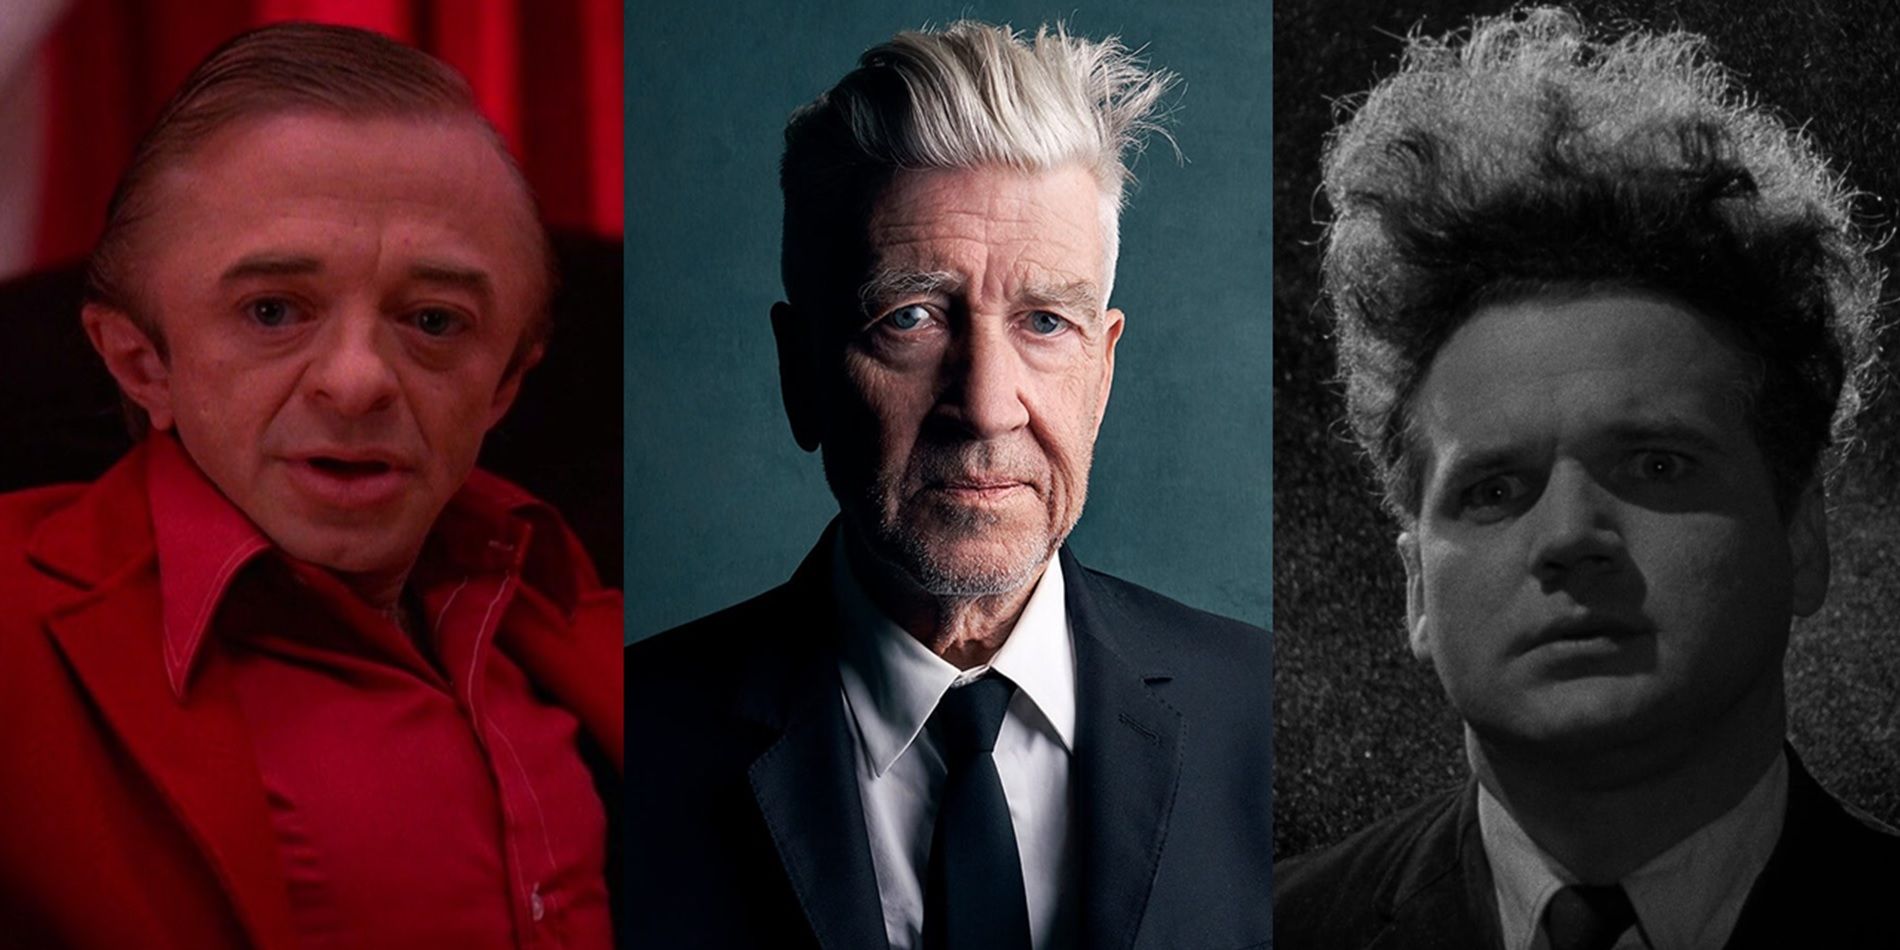 David Lynch, Eraserhead, and the Man from Another Place